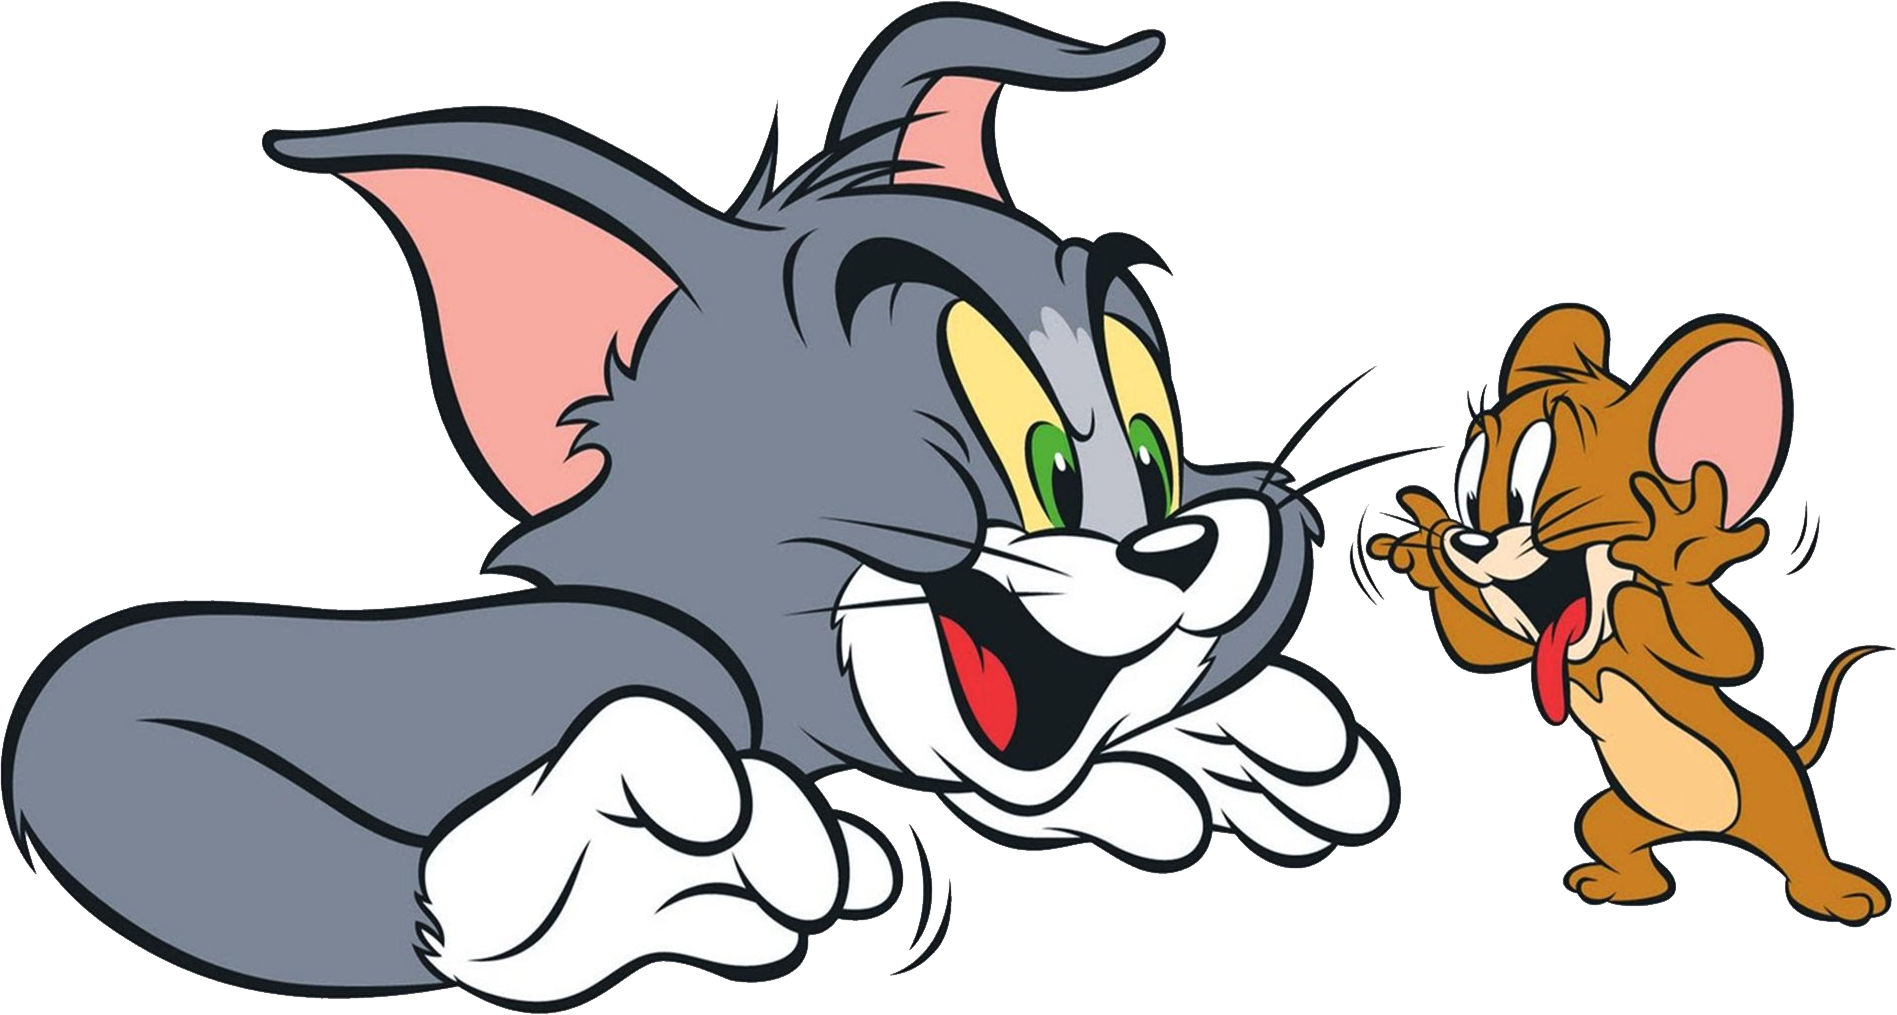 Jerry Mouse Tom Cat Tom and Jerry Cartoon Network.